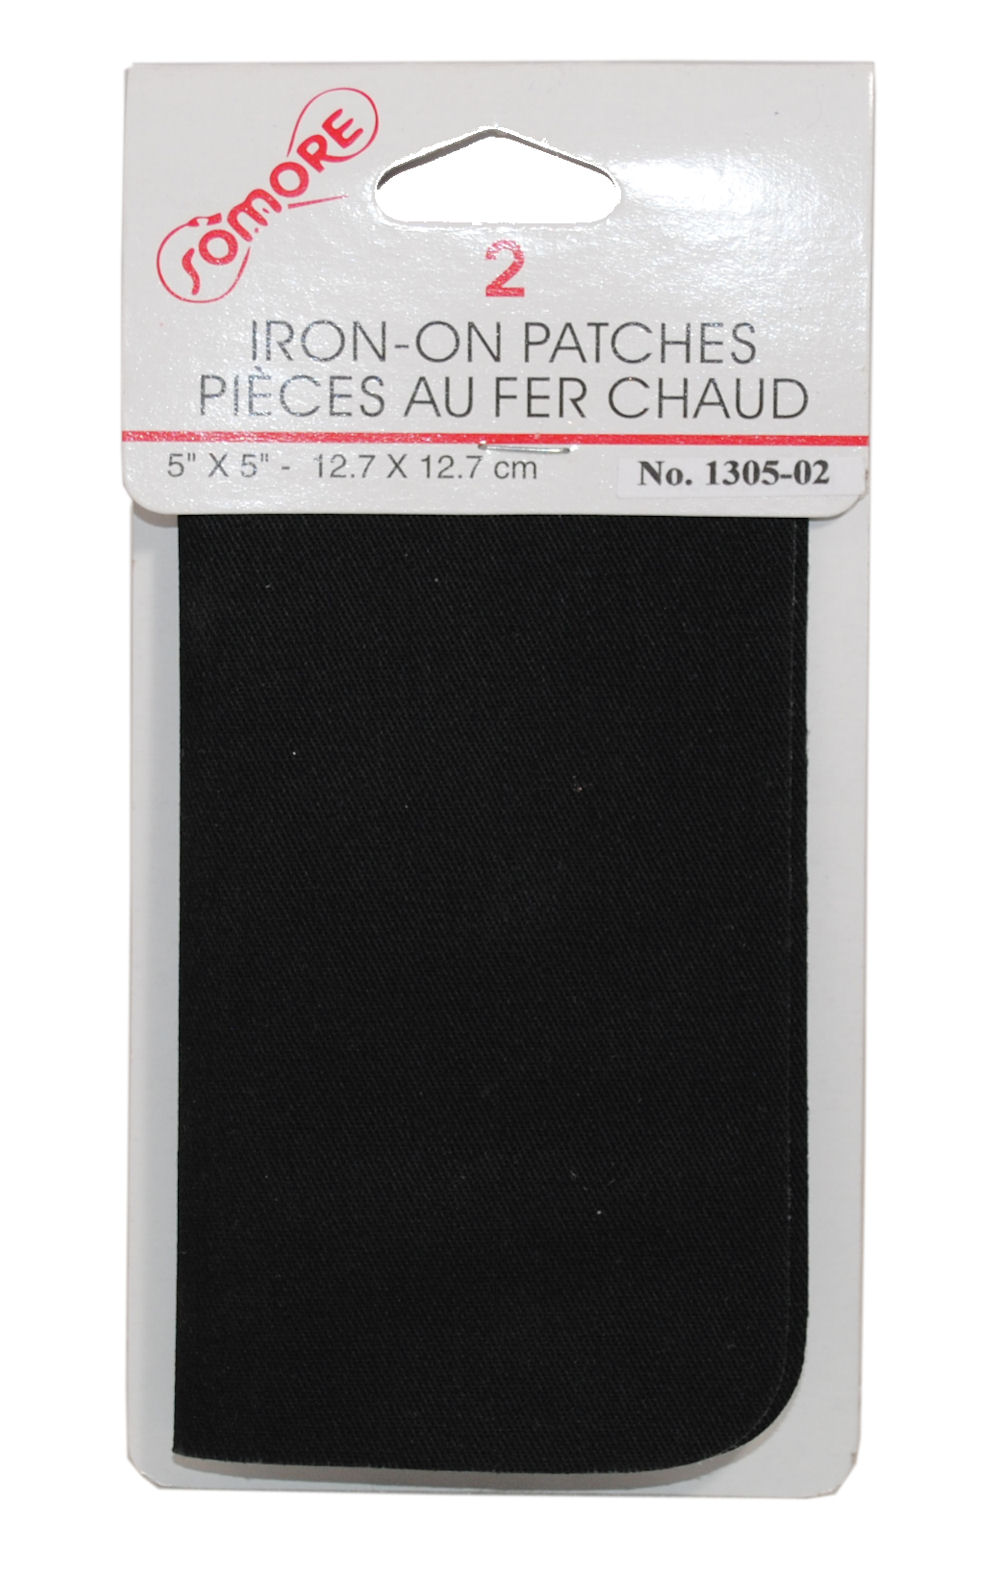 Somore 1305-02 2 Iron On Repair Patches Mends fabric Black 5" x 5"  #1305-02